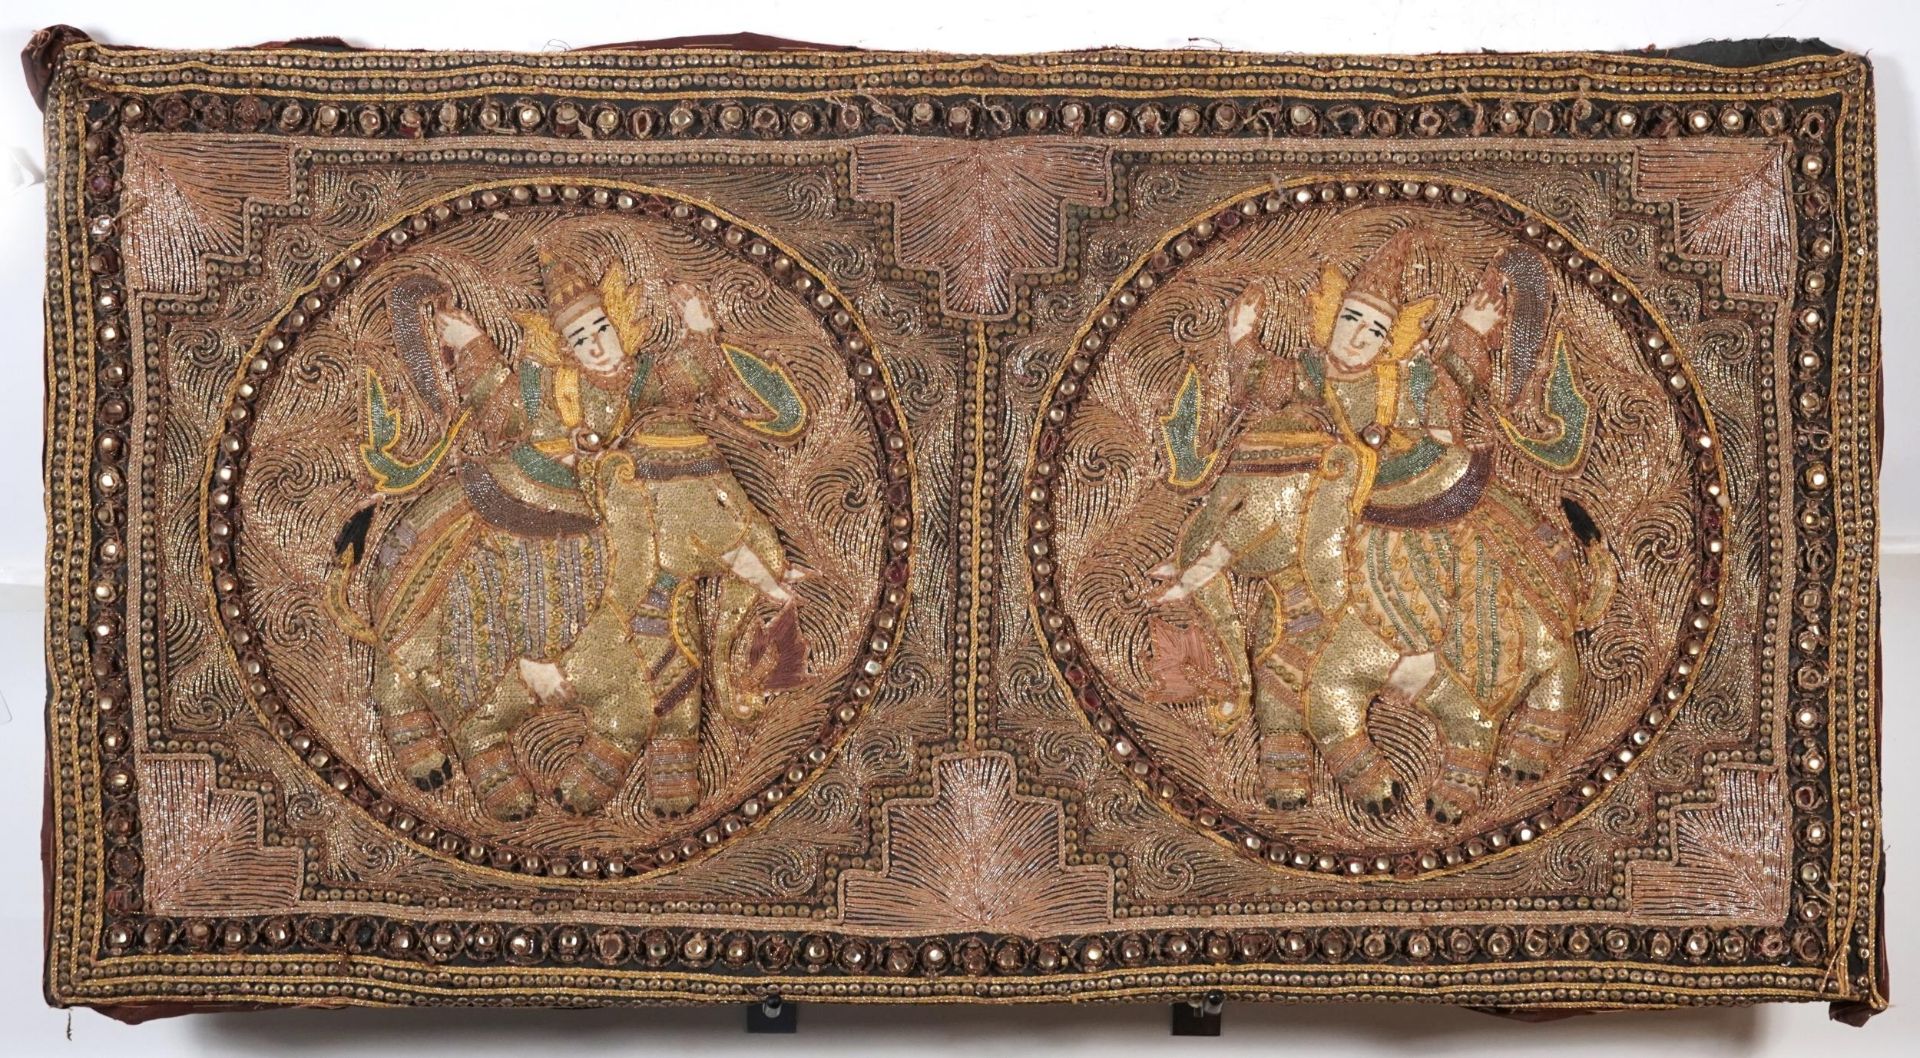 Indian textile wall hanging embroidered with deities on elephant back, unframed, 90cm x 47cm : For